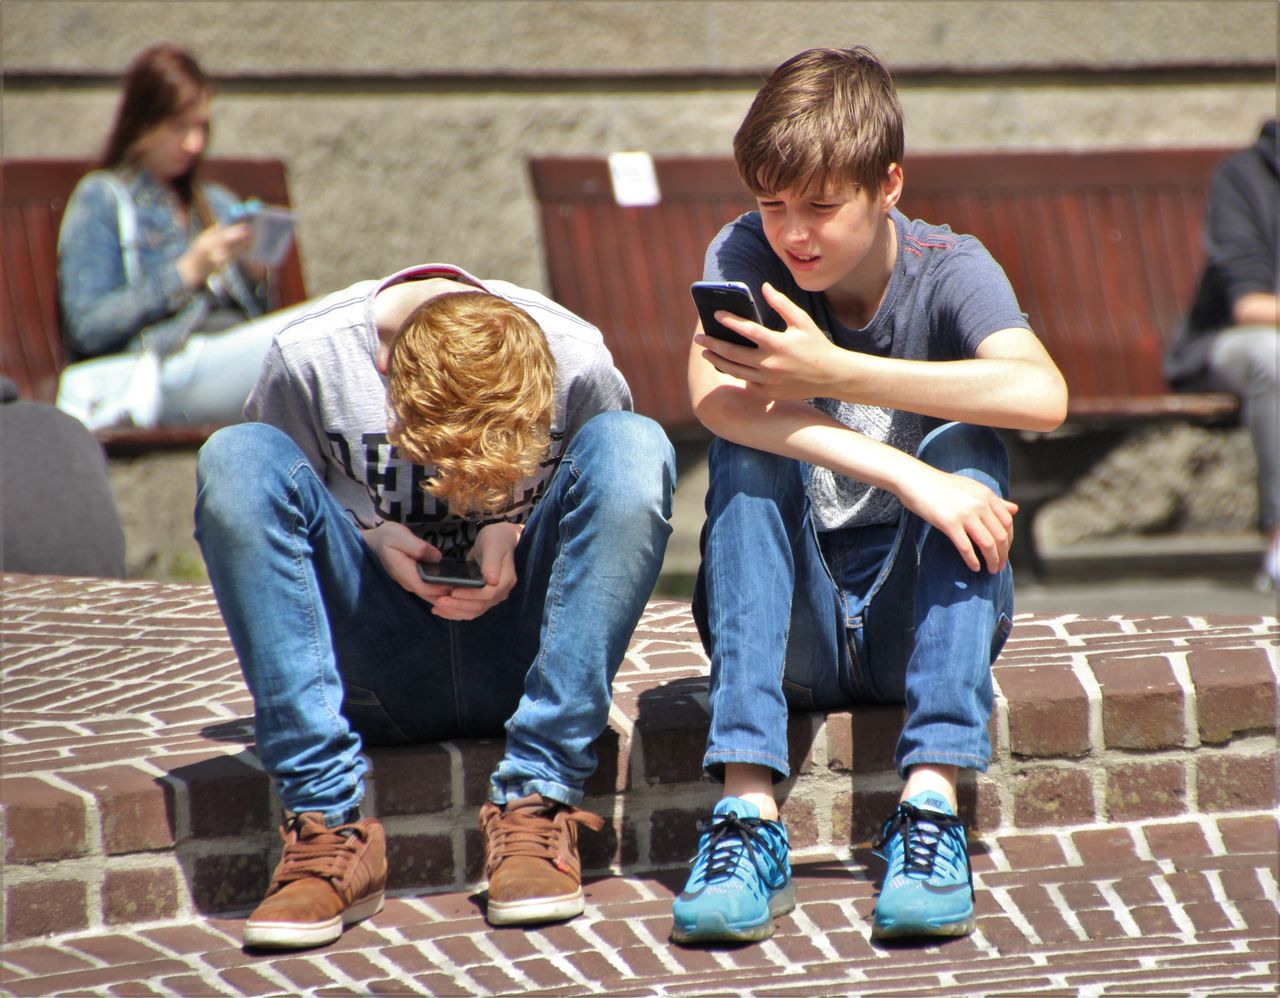 Scientists confirm: Your child's smartphone usage may be a concern